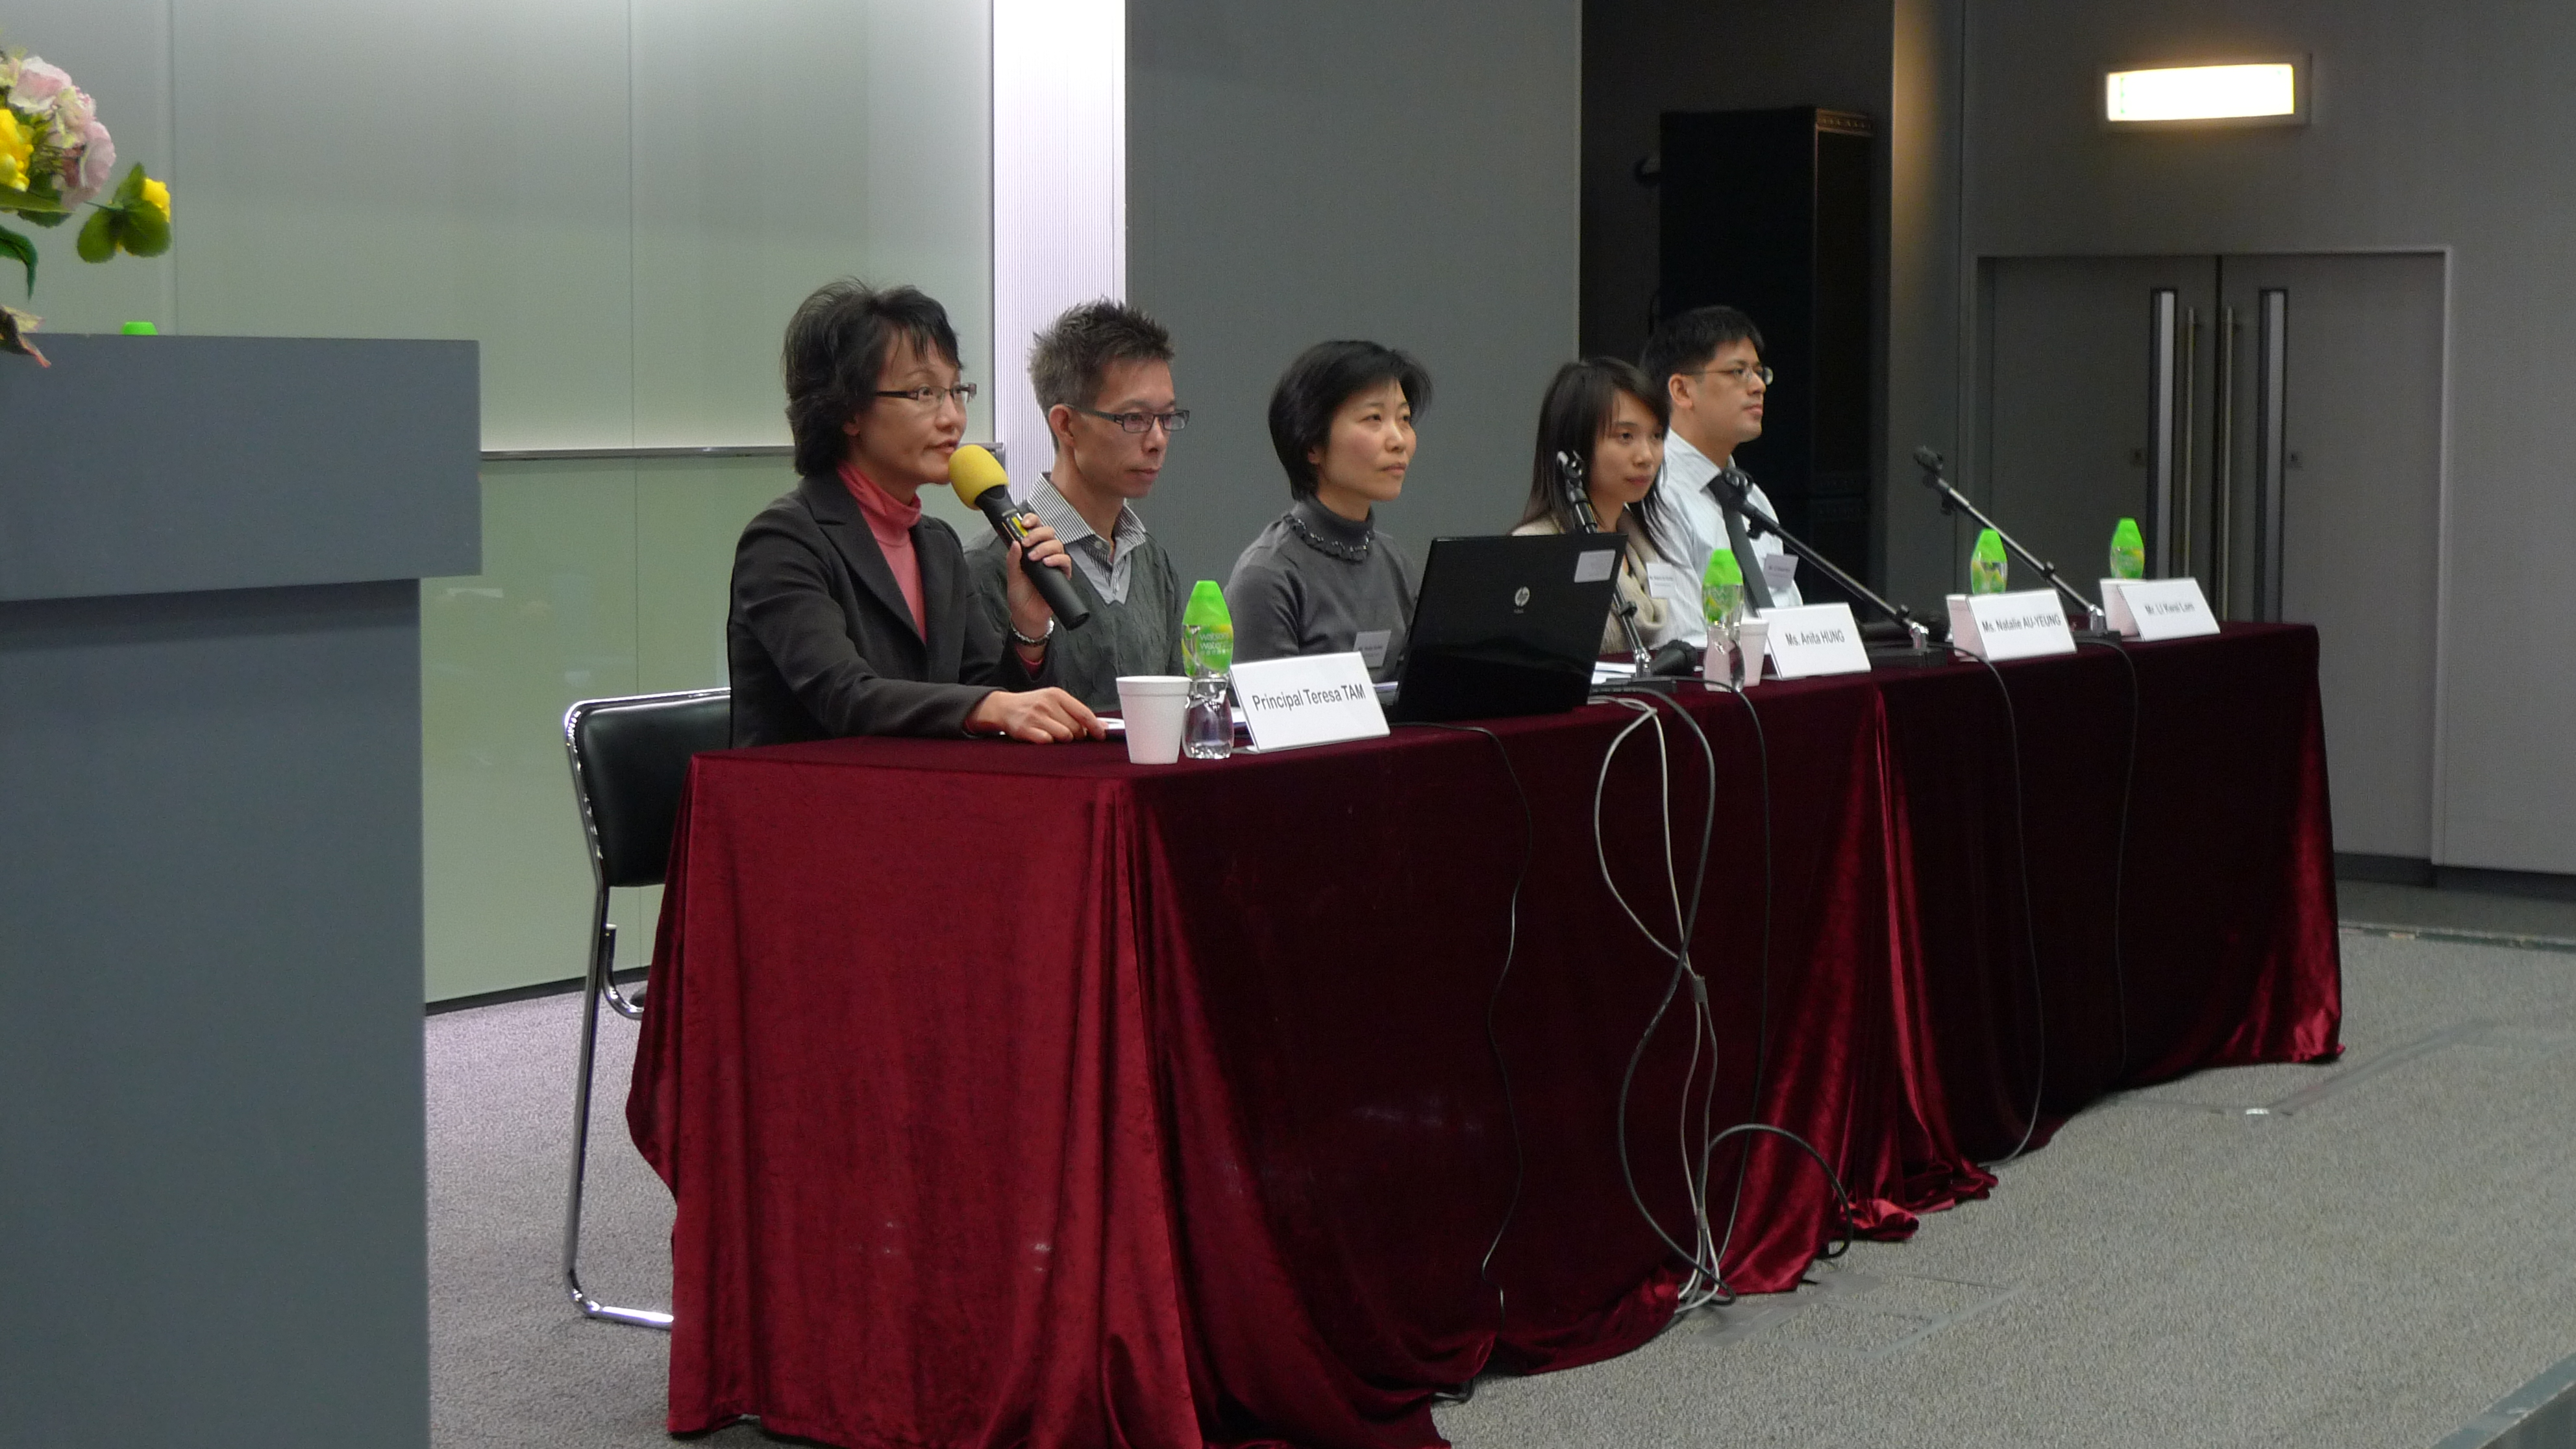 From left to right: Ms Teresa Tam, Mr Andrew Ho, Ms Anita Hung, Ms Natalie Au-yeung, Mr Li Kwai Lam